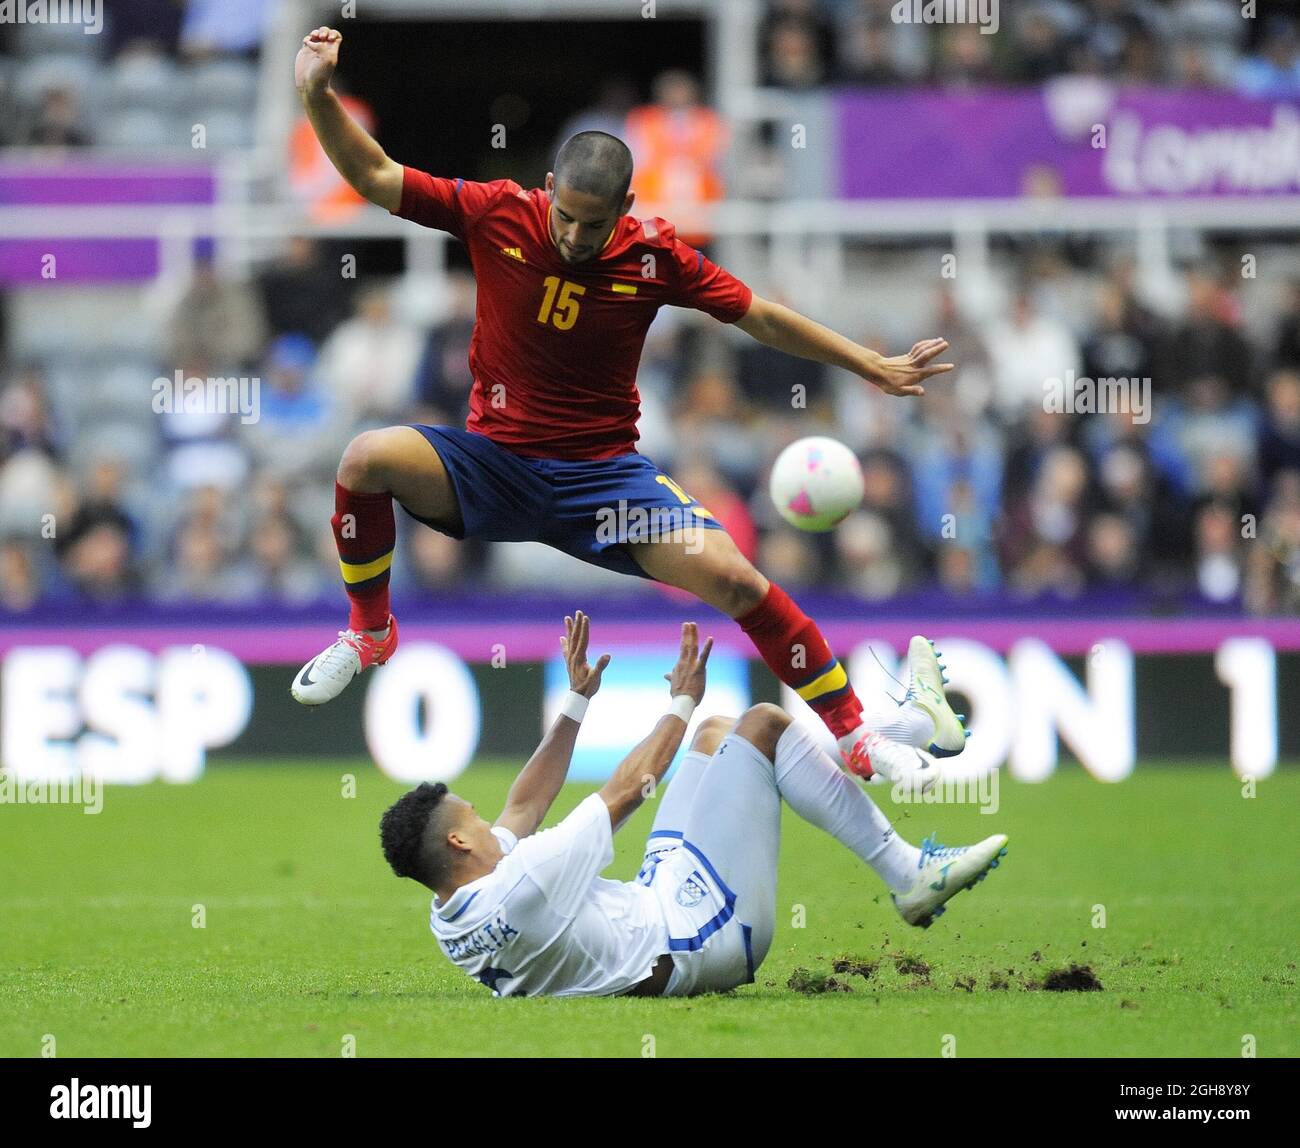 Spain's Isco avoids a challenge from Honduras' Arnold Peralta during the London Olympic 2012 first round Group D men's match between Spain v Honduras at the St. James' Park, Newcastle upon Tyne on the 29th July 2012. Stock Photo